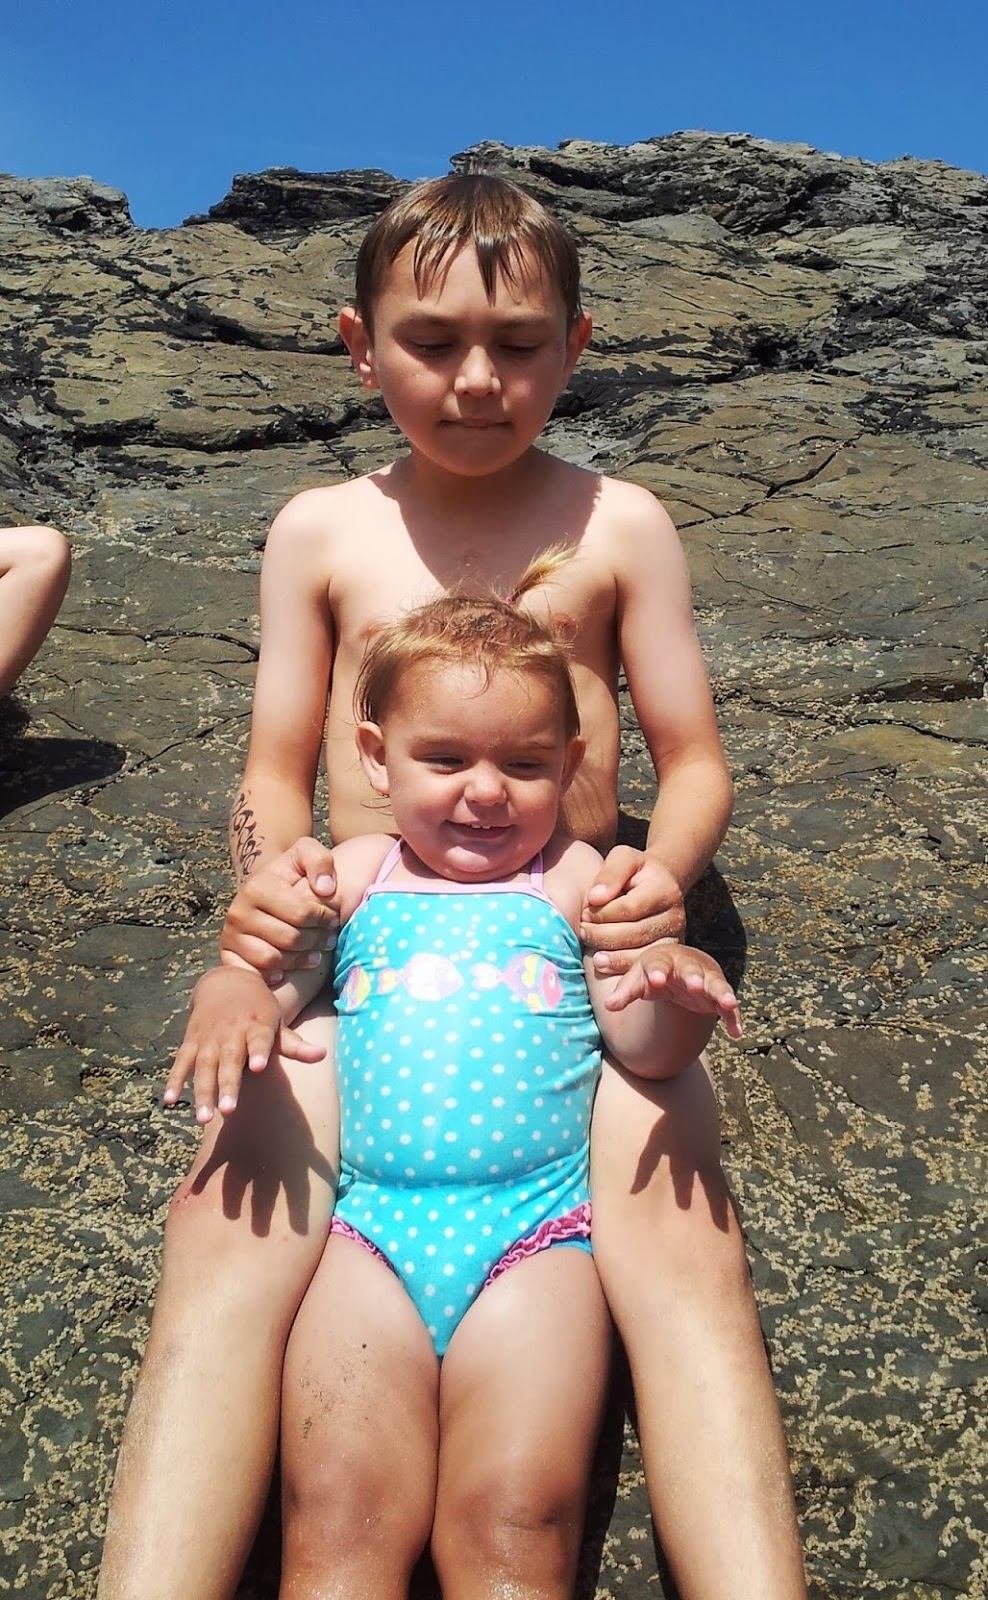 , Soaking up the Sun at West Angle Beach #Pembrokeshire #Wales #CountryKids